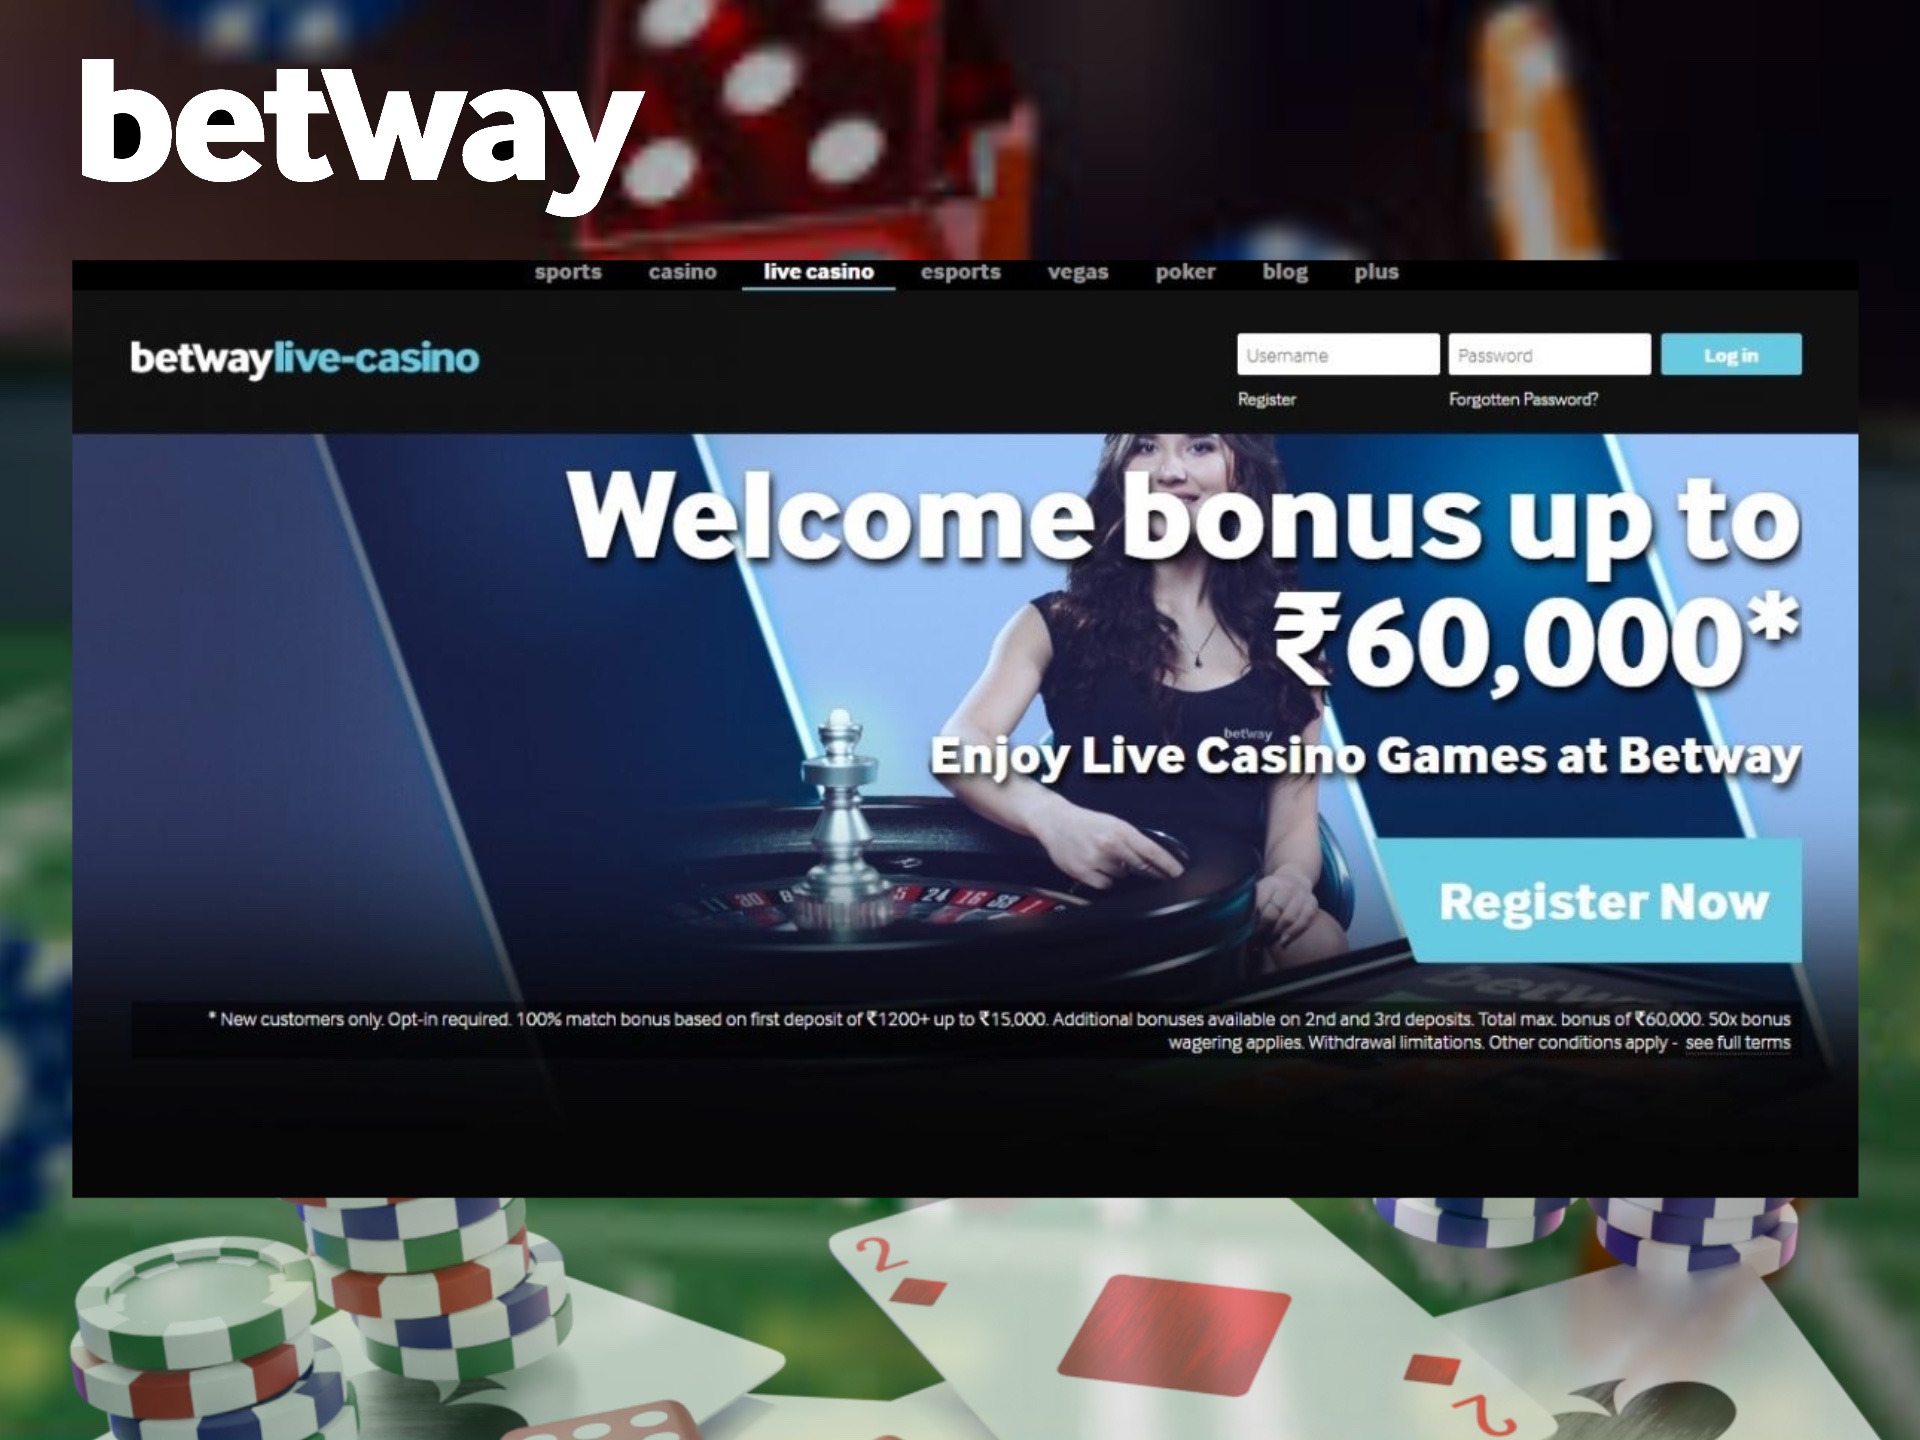 Sign up for Betway and get up to 80 000 Rupees for online casino games.